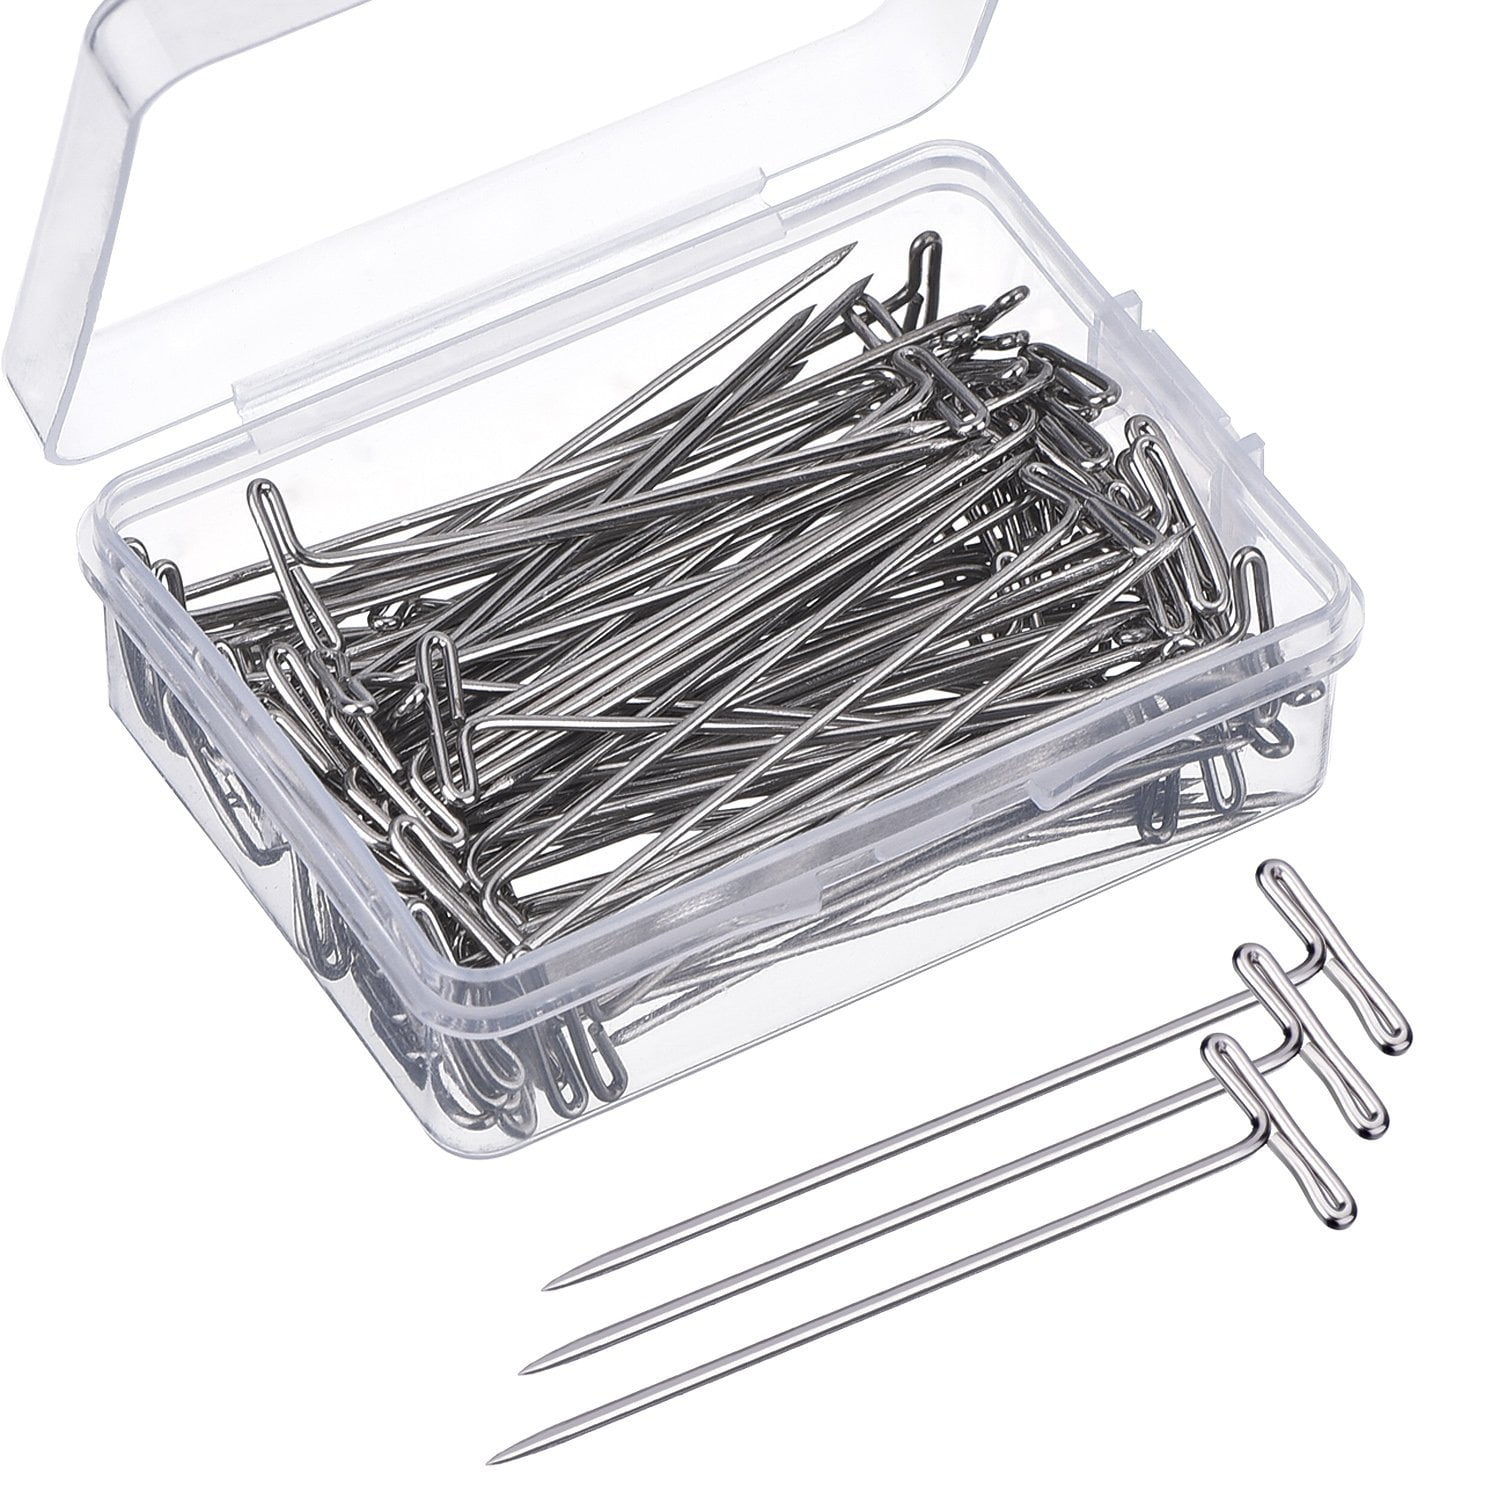  Mr. Pen- T Pins, 220 Pack, Assorted Sizes, T-Pins, T Pins for  Blocking Knitting, Wig Pins, T Pins for Wigs, Wig Pins for Foam Head, T Pins  for Sewing, Wig T